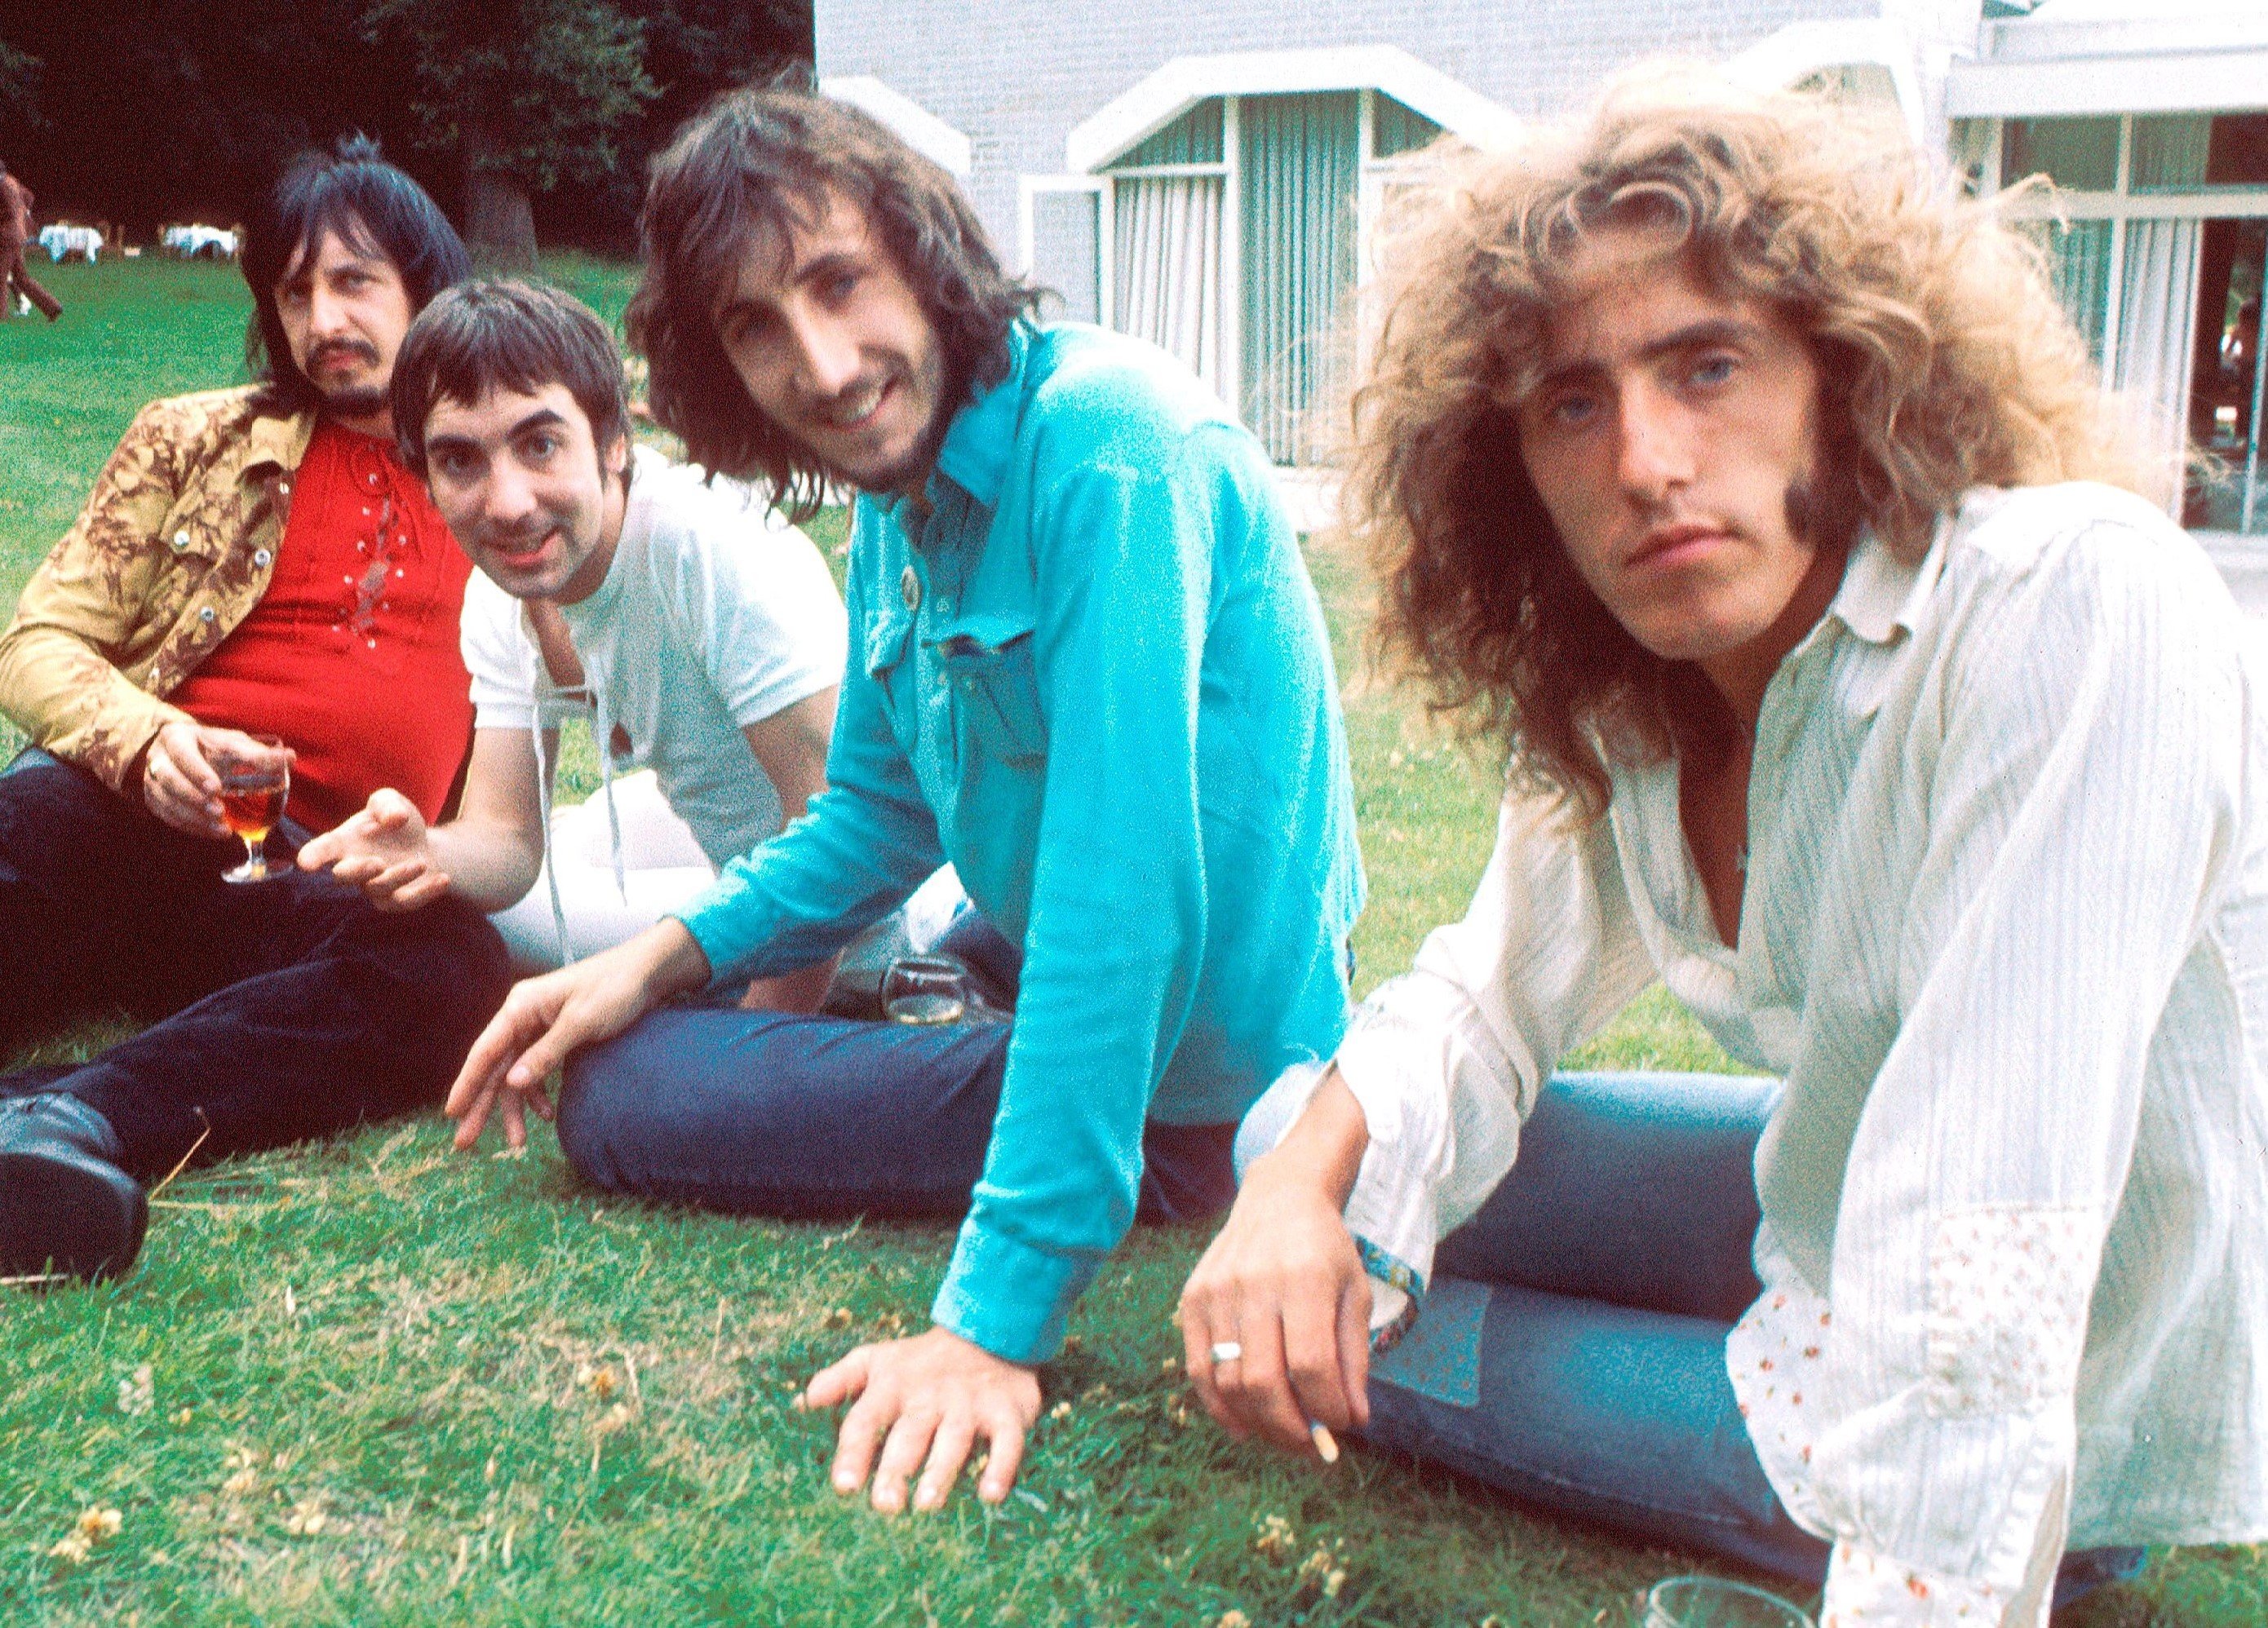 The Who on the grass during the "Pinball Wizard" era